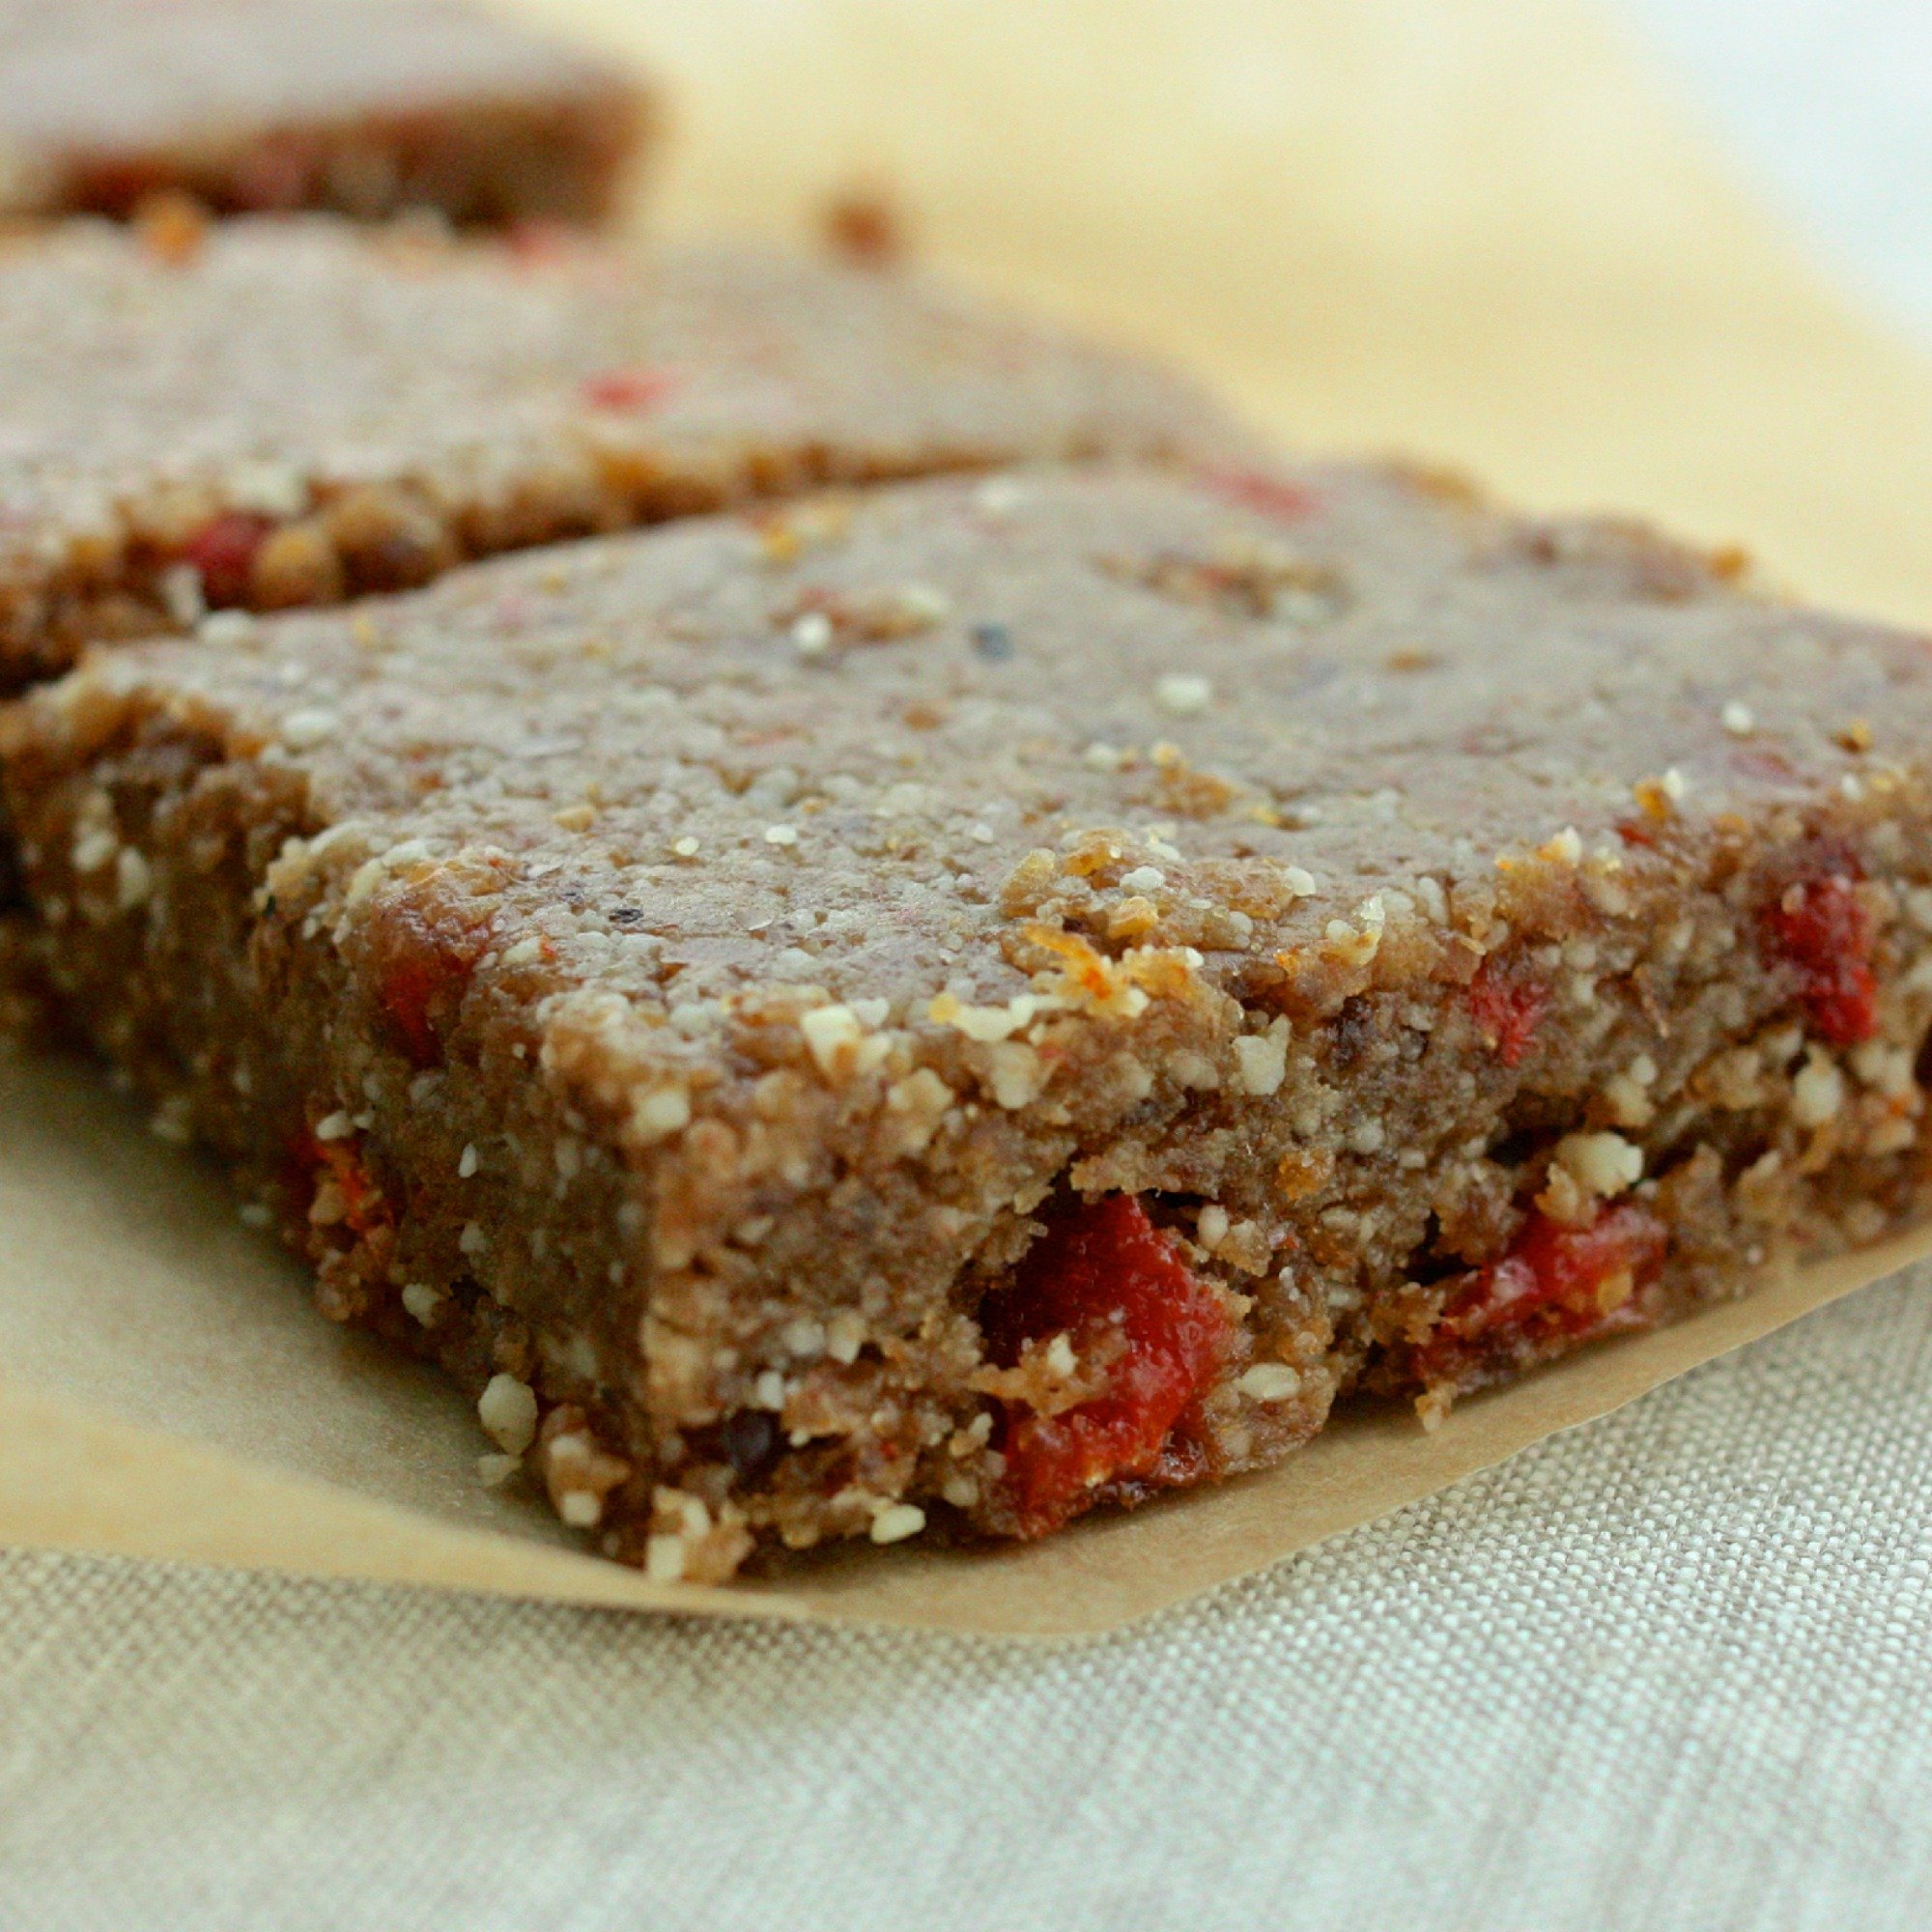 Higher Protein Raw, Vegan Snack Bars. Easy to Customize! - The Full Helping